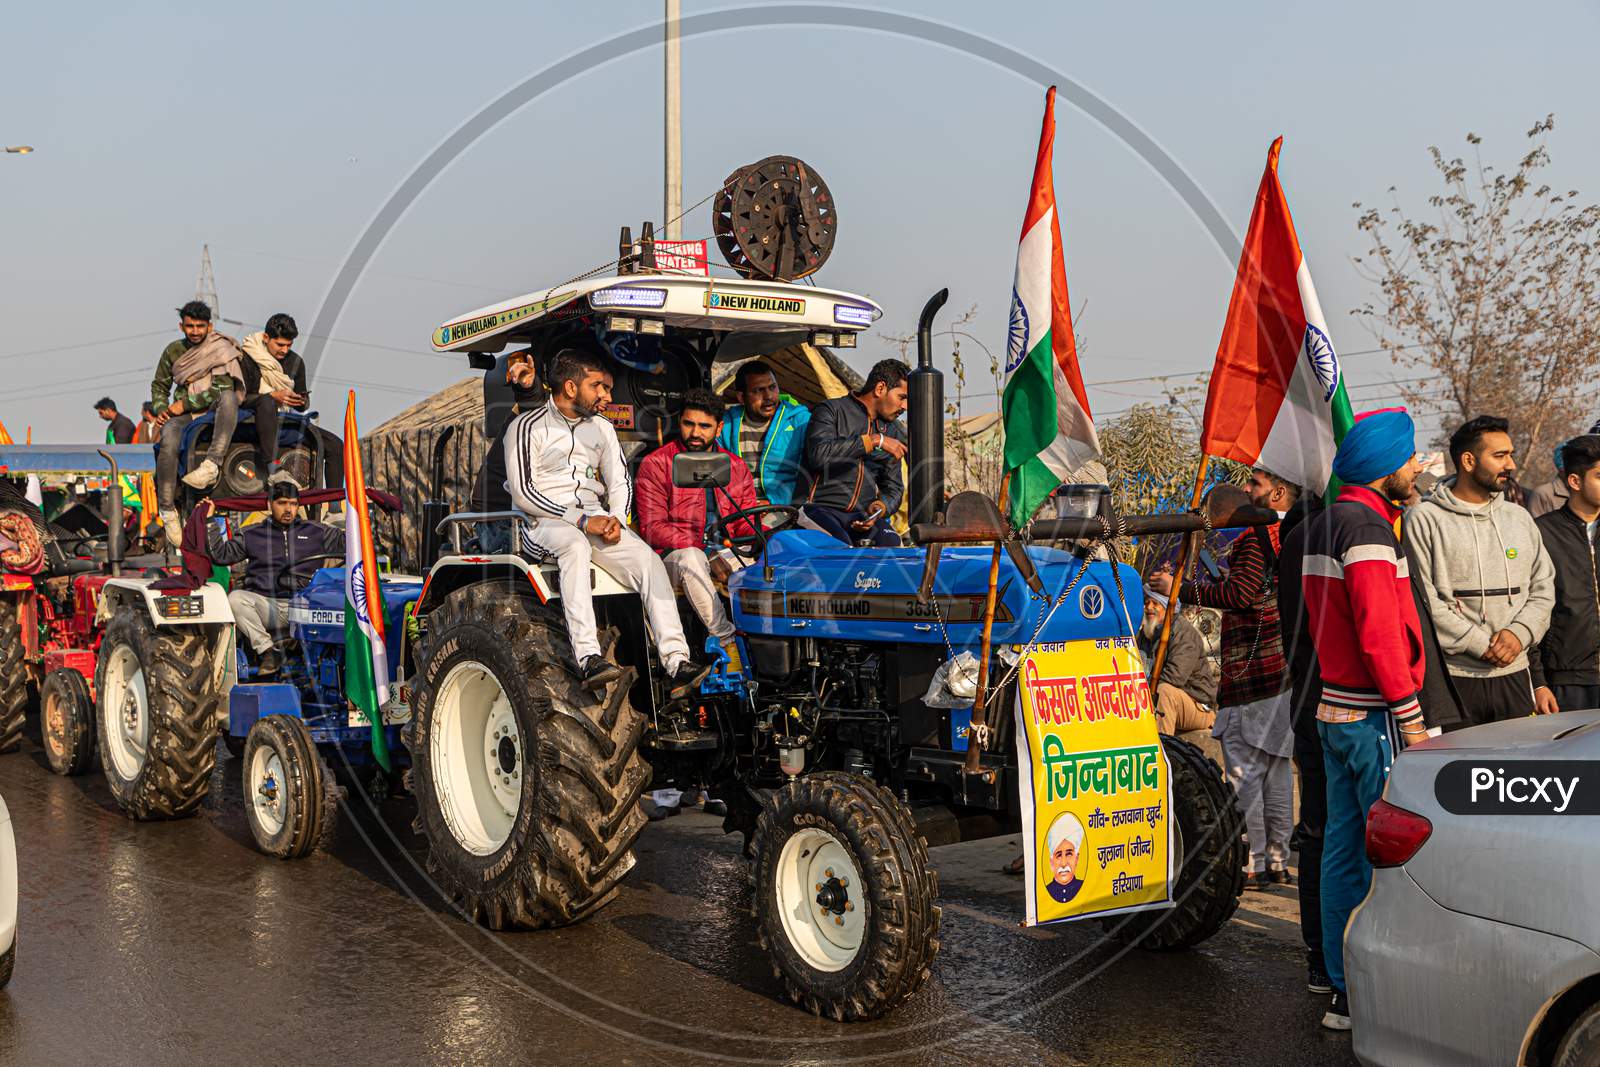 Farmers Are Protesting Against New Farm Law Passed By Indian Government.